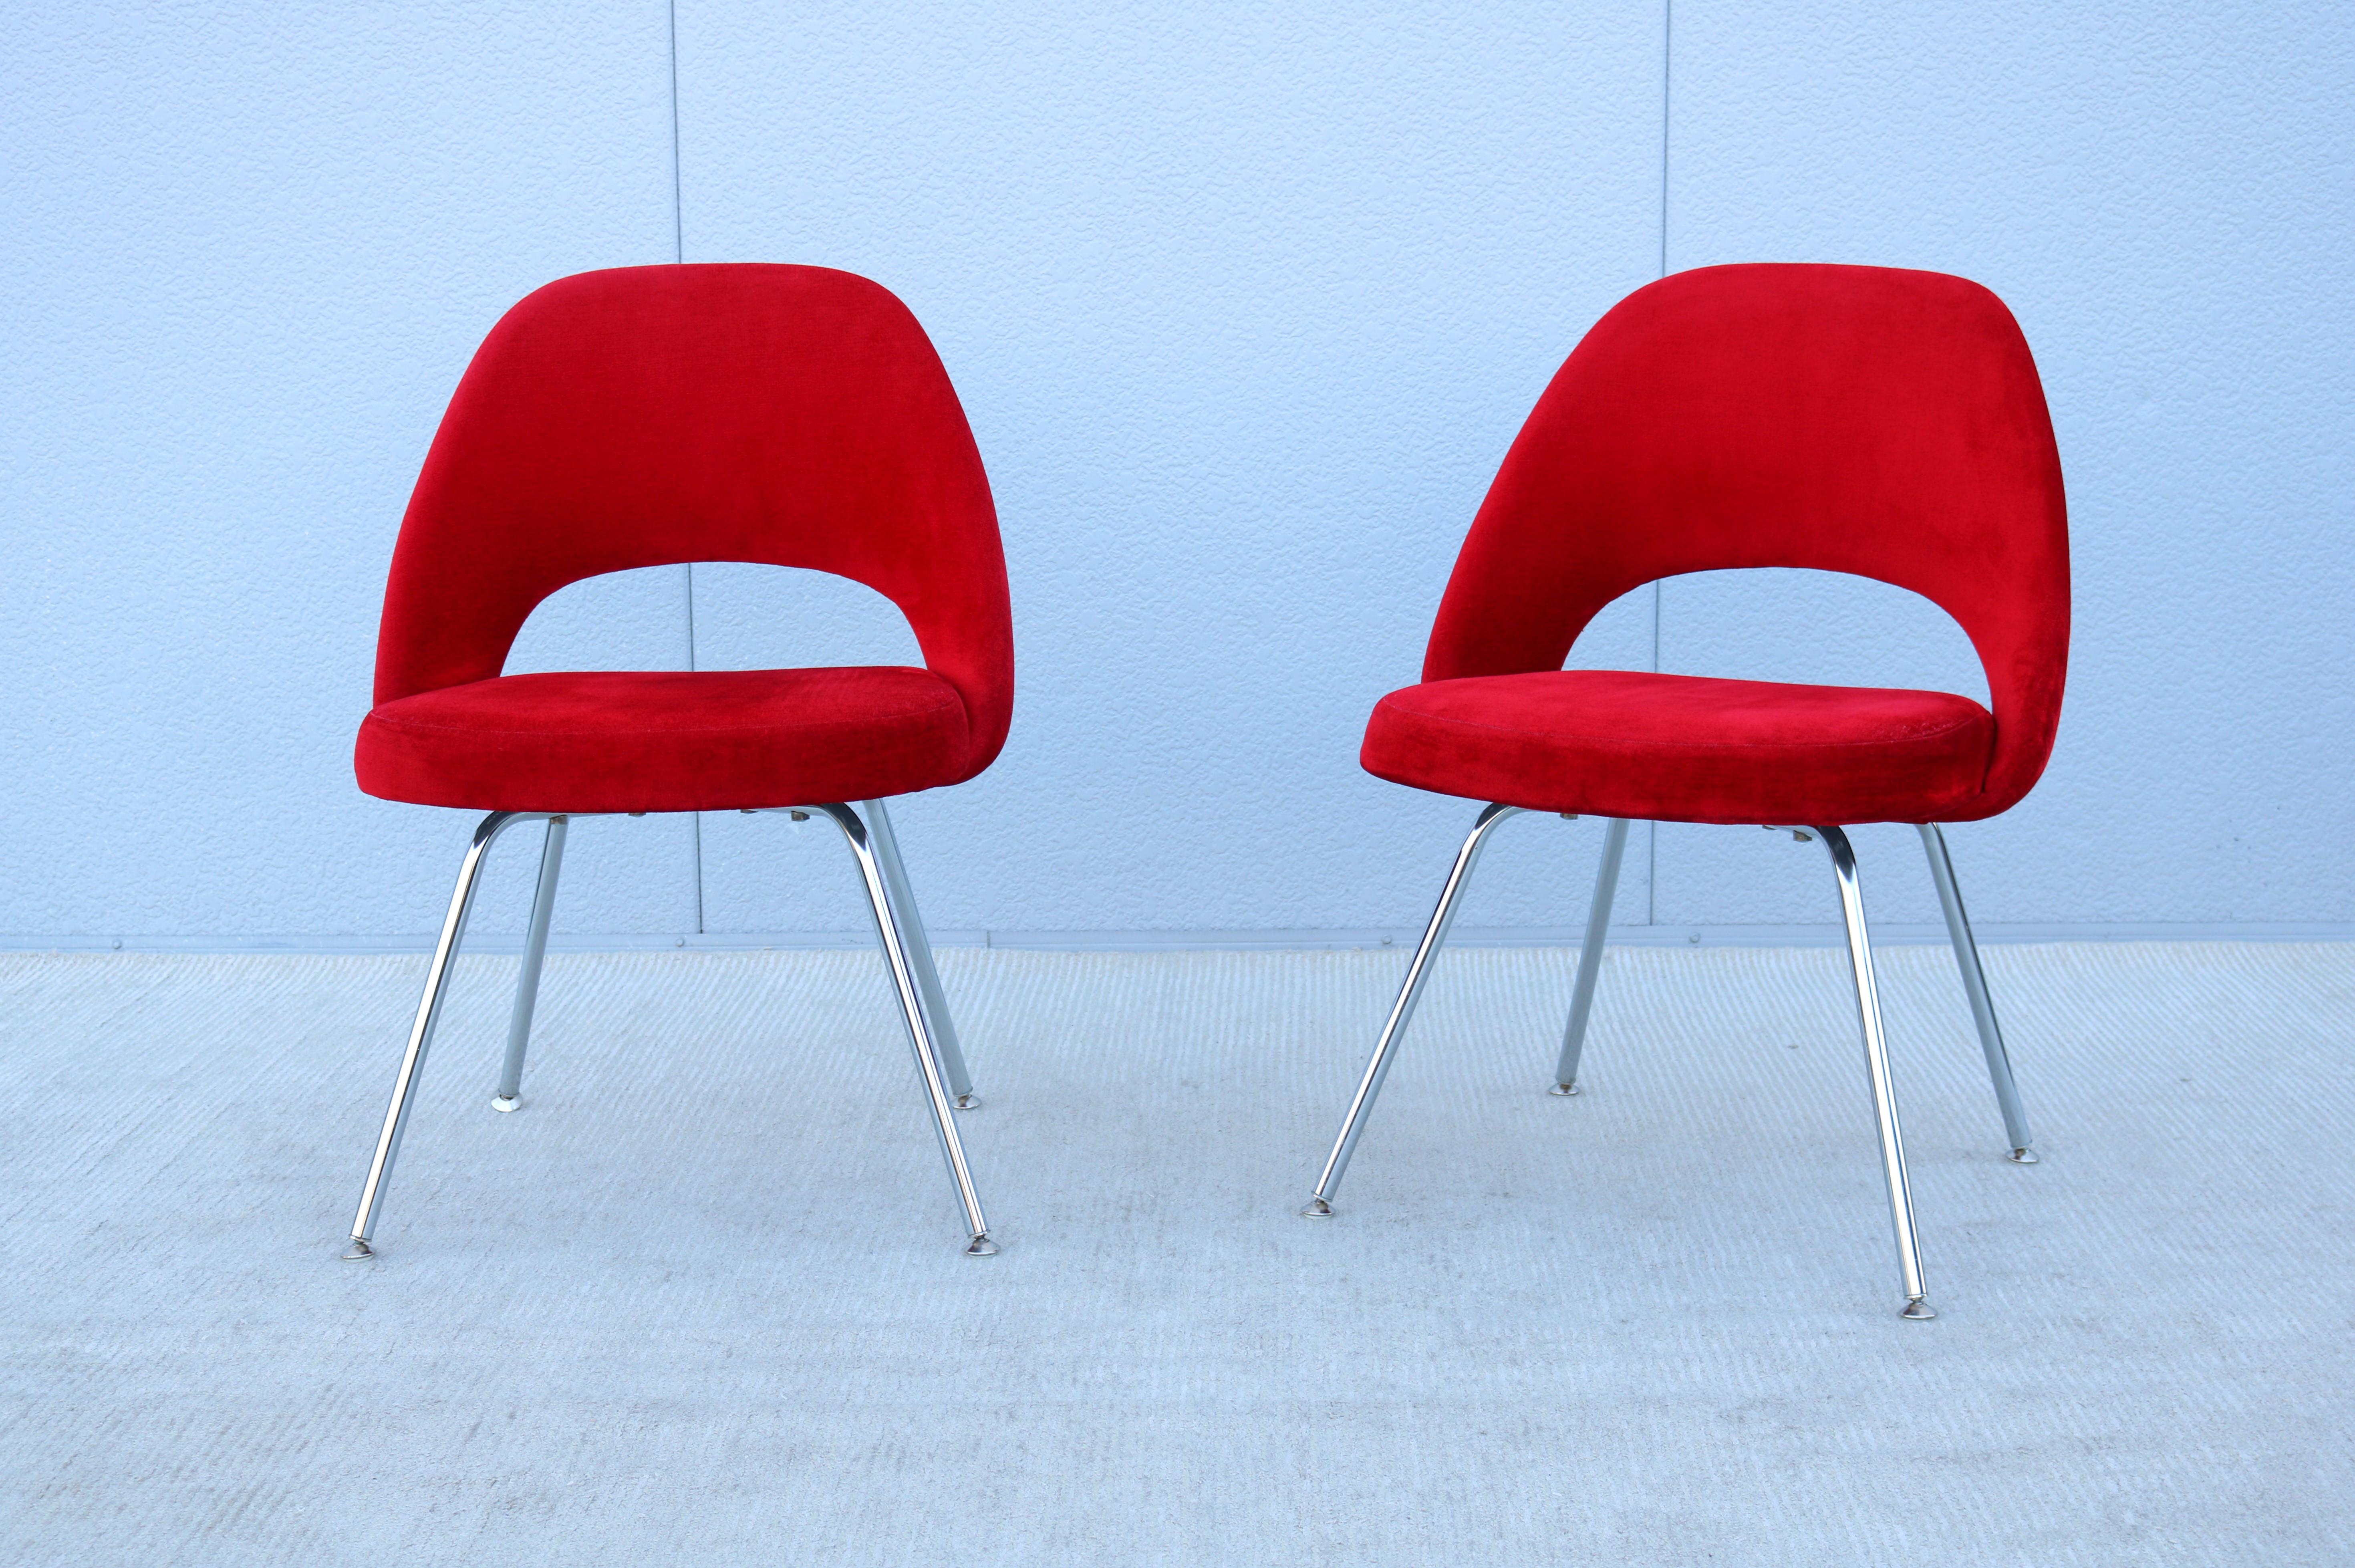 Steel Mid-Century Modern Eero Saarinen for Knoll Red Executive Armless Chairs - a Pair For Sale